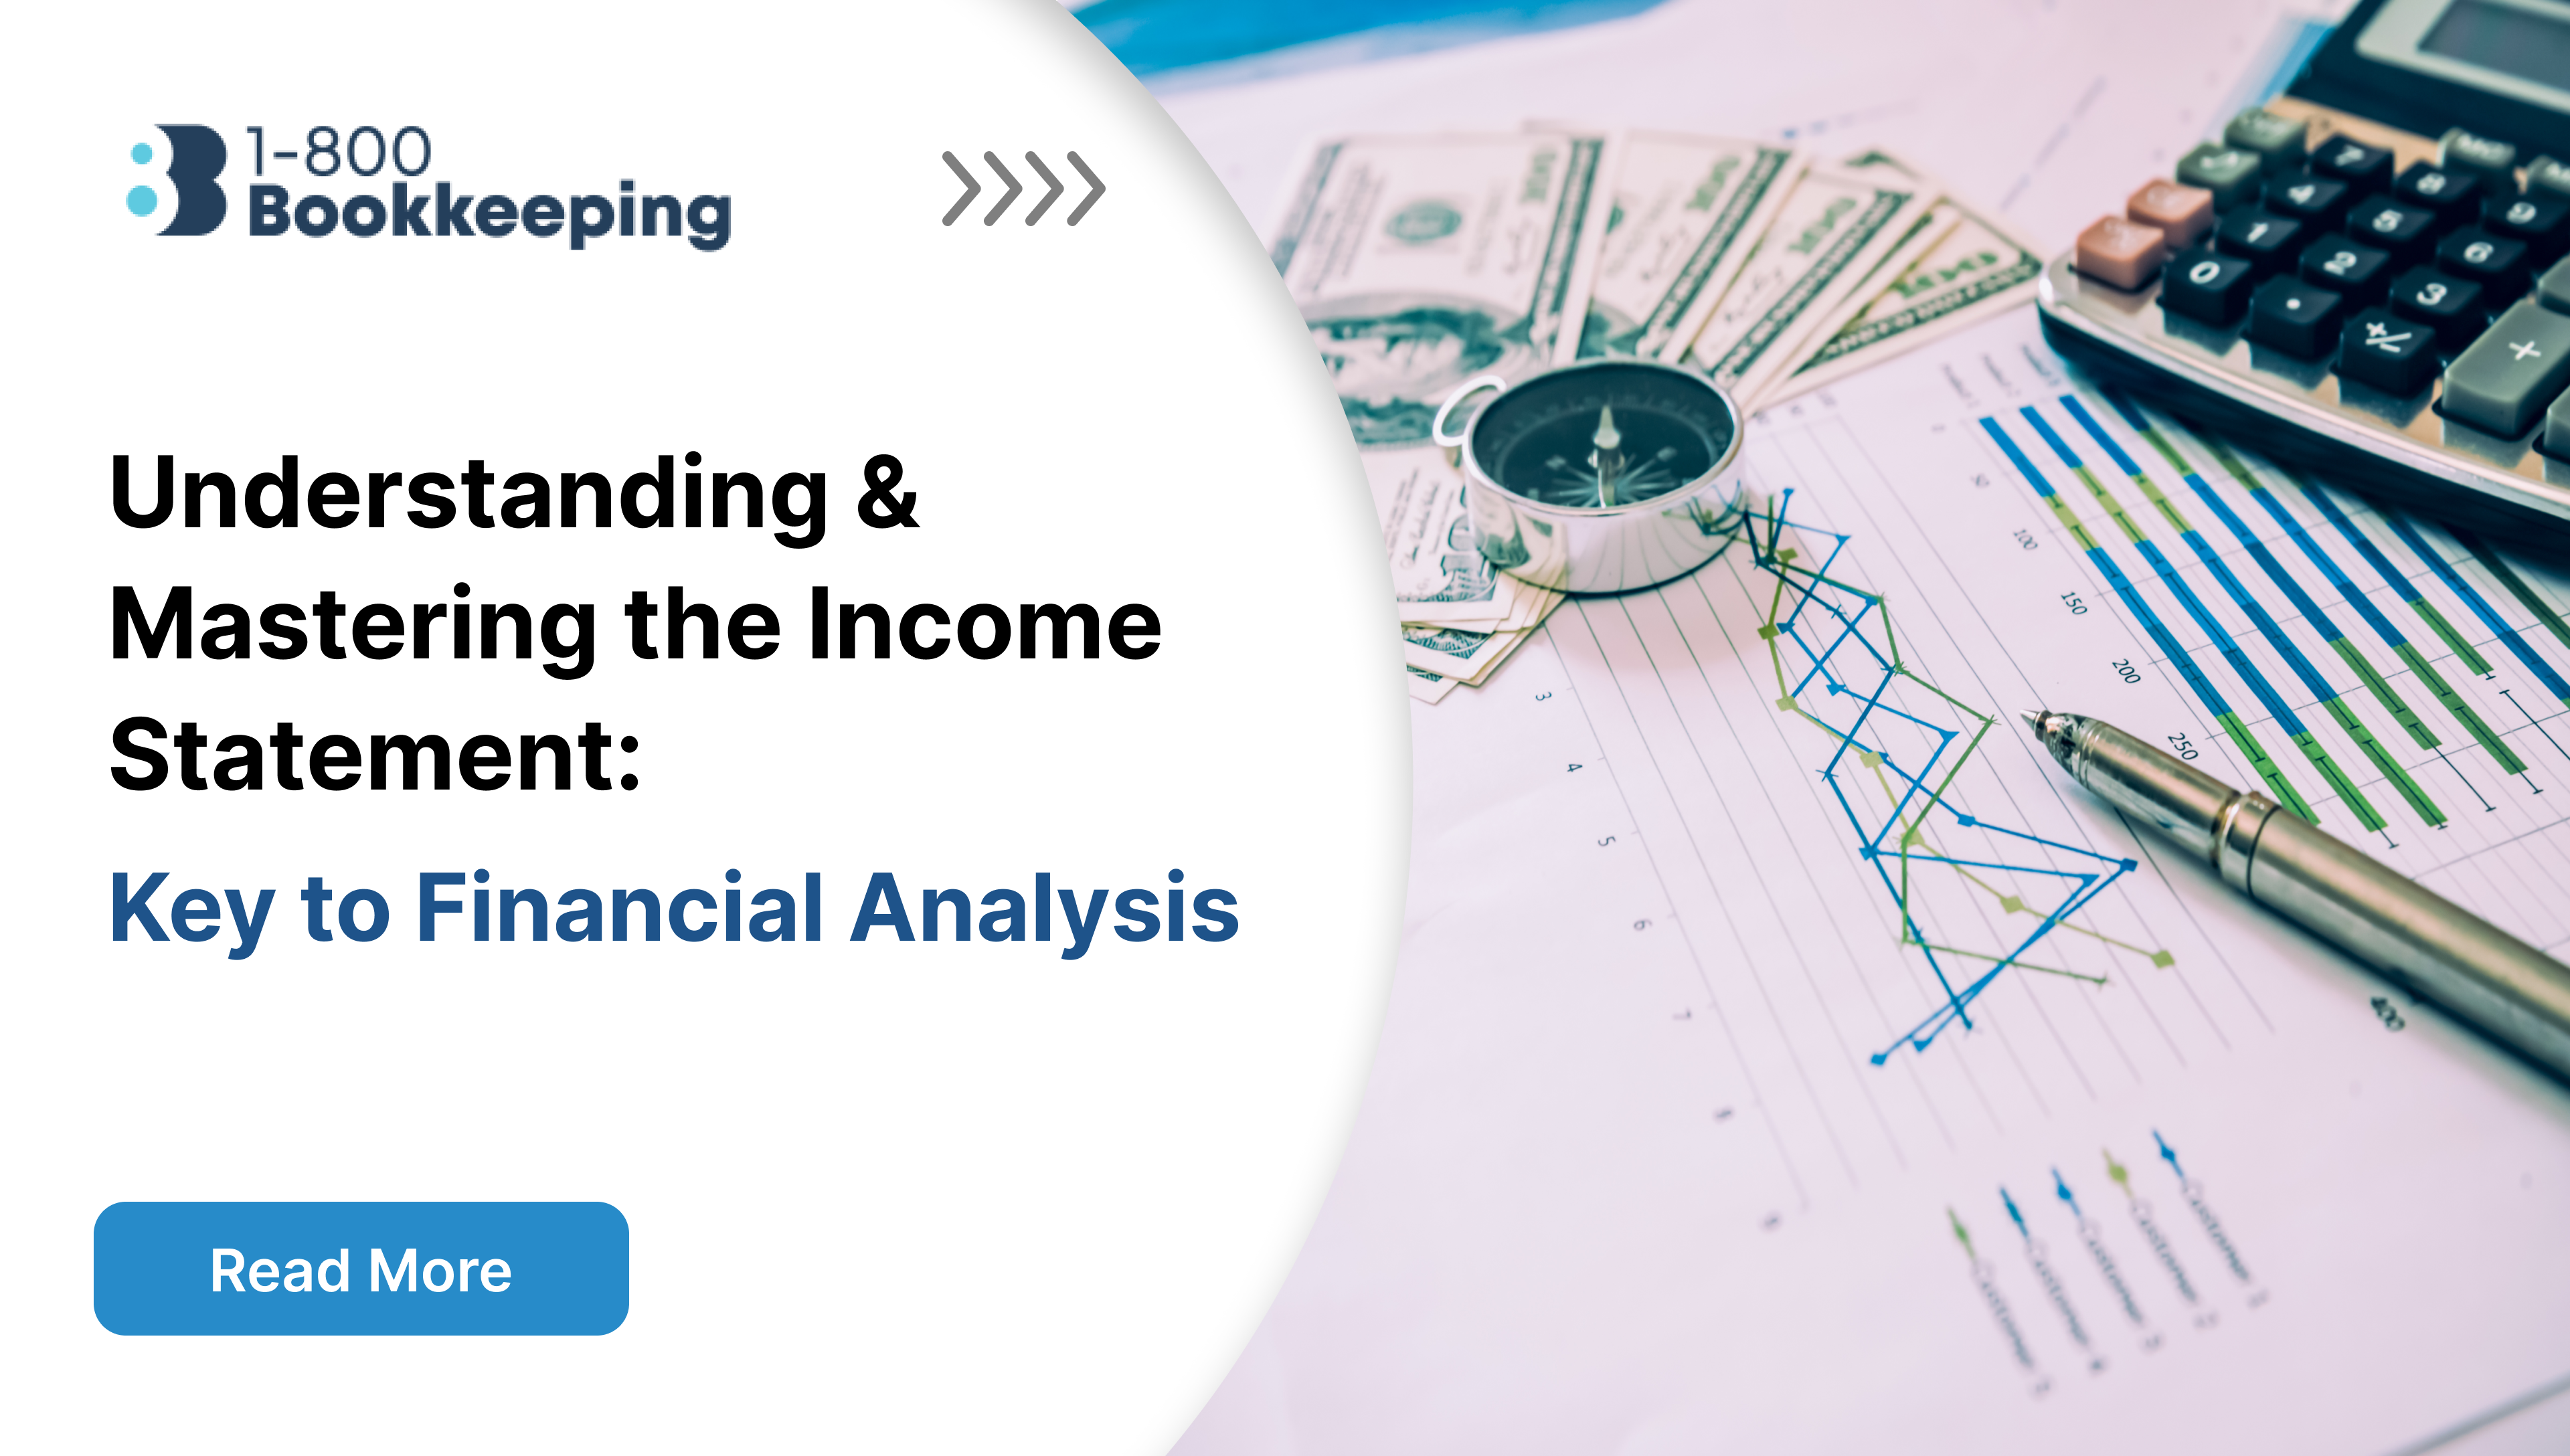 Understanding & Mastering the Income Statement: Key to Financial Analysis